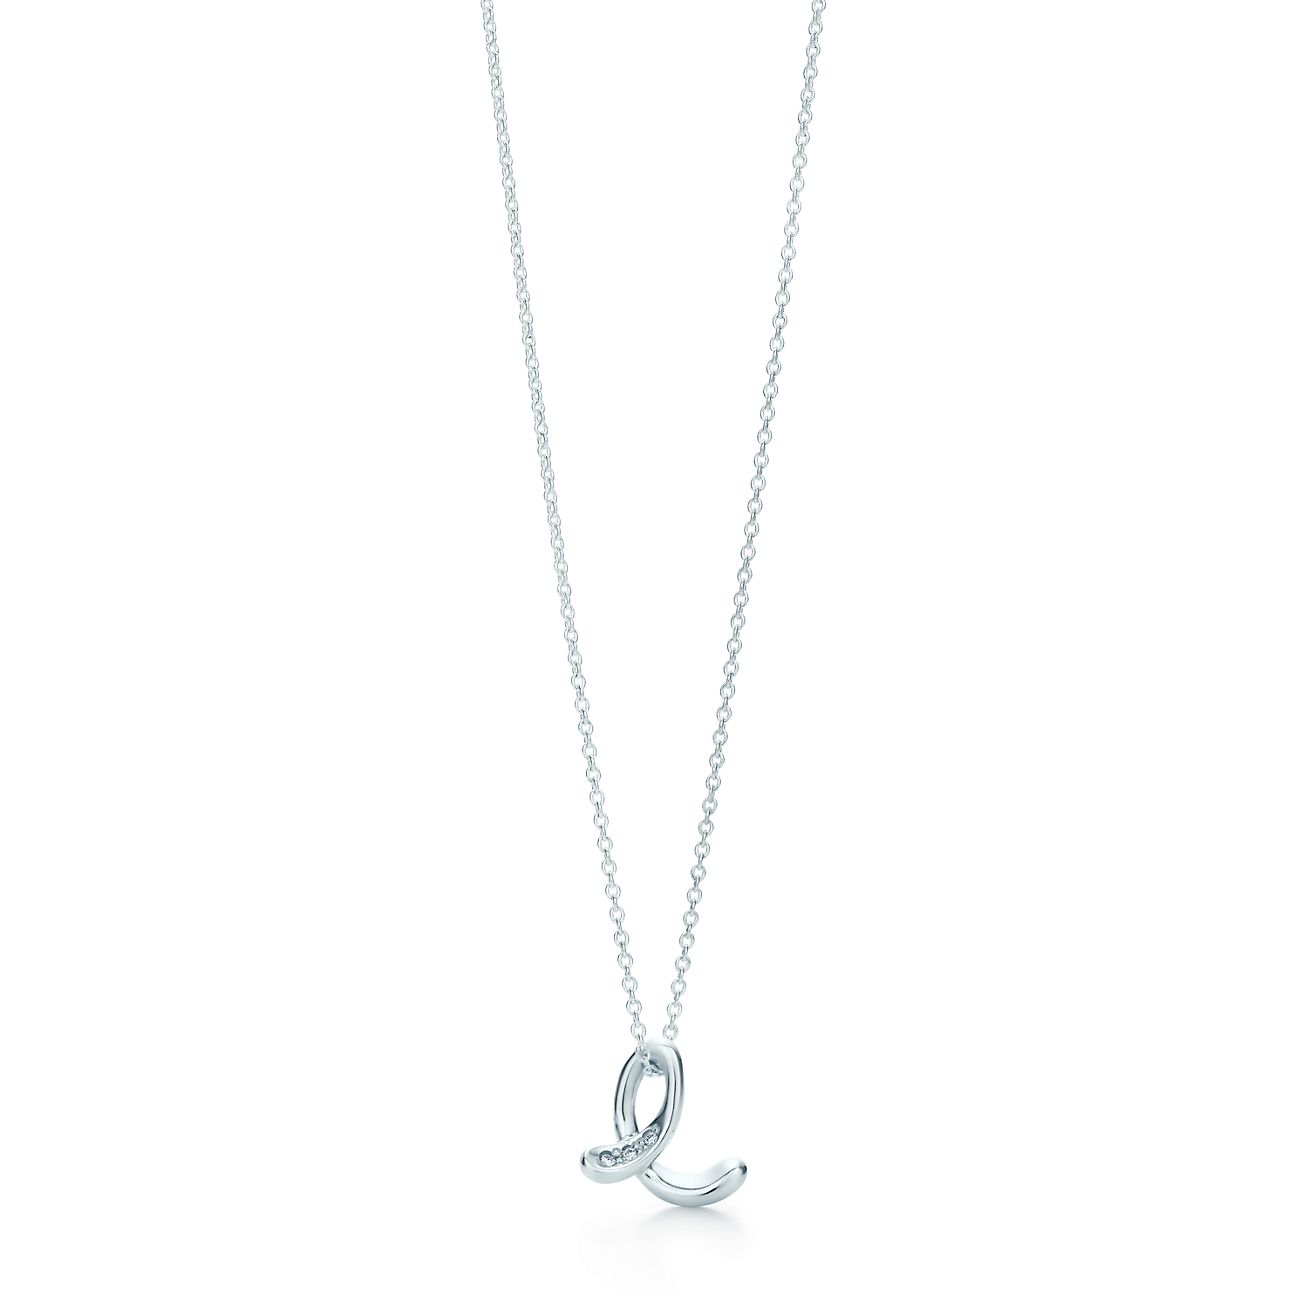 tiffany initial necklace